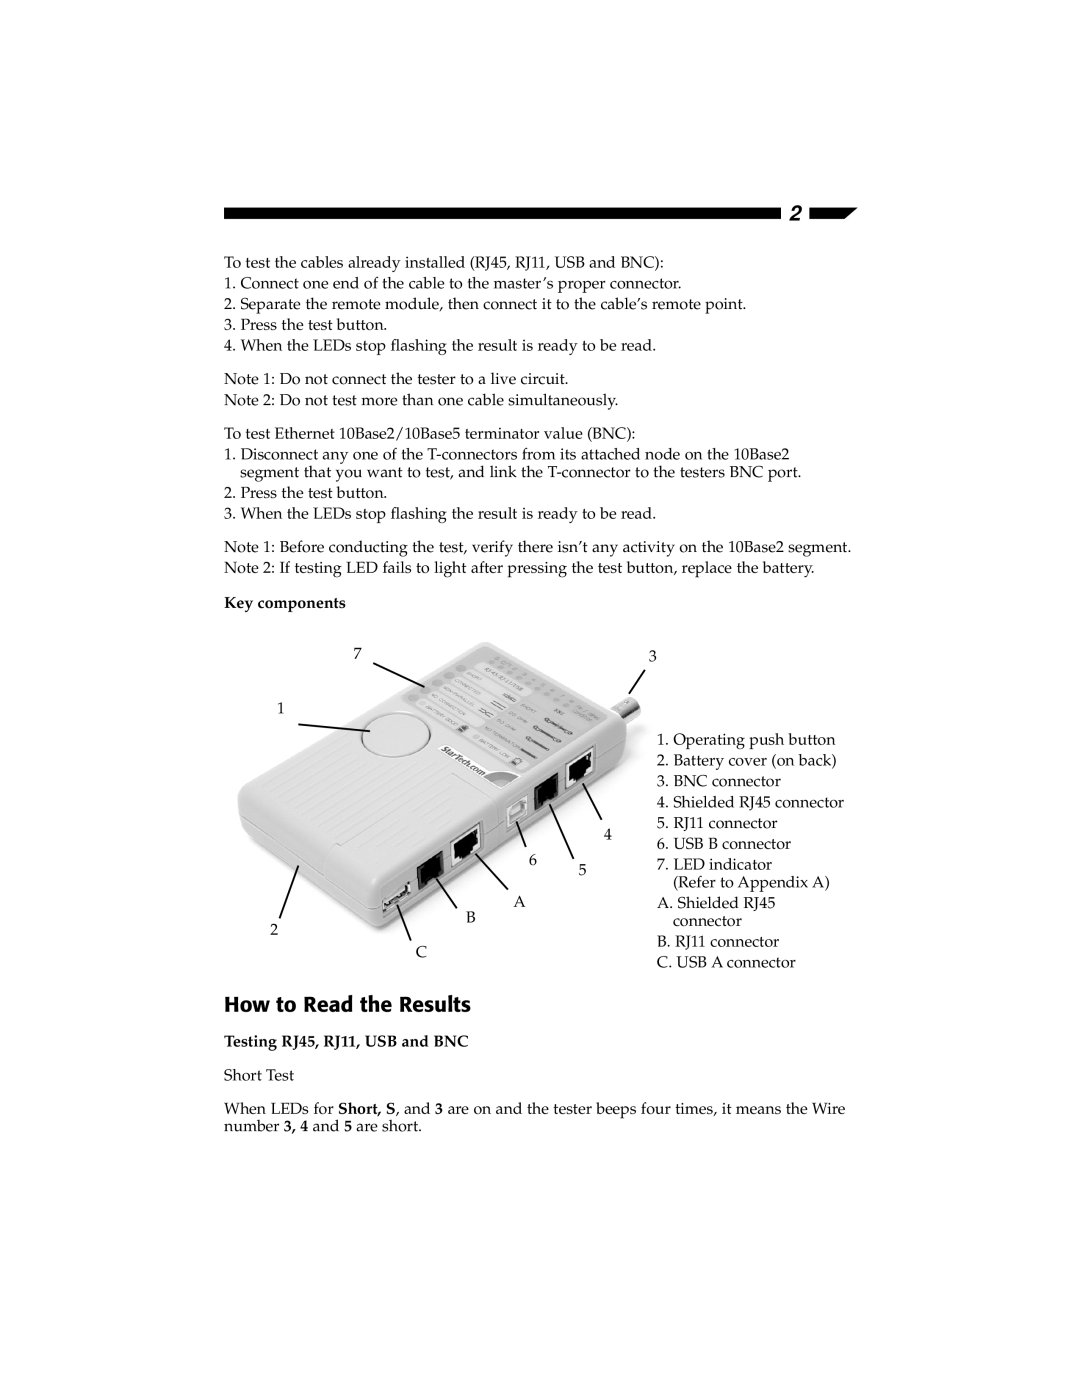 StarTech.com CTK400LAN installation manual How to Read the Results, Key components, Testing RJ45, RJ11, USB and BNC 